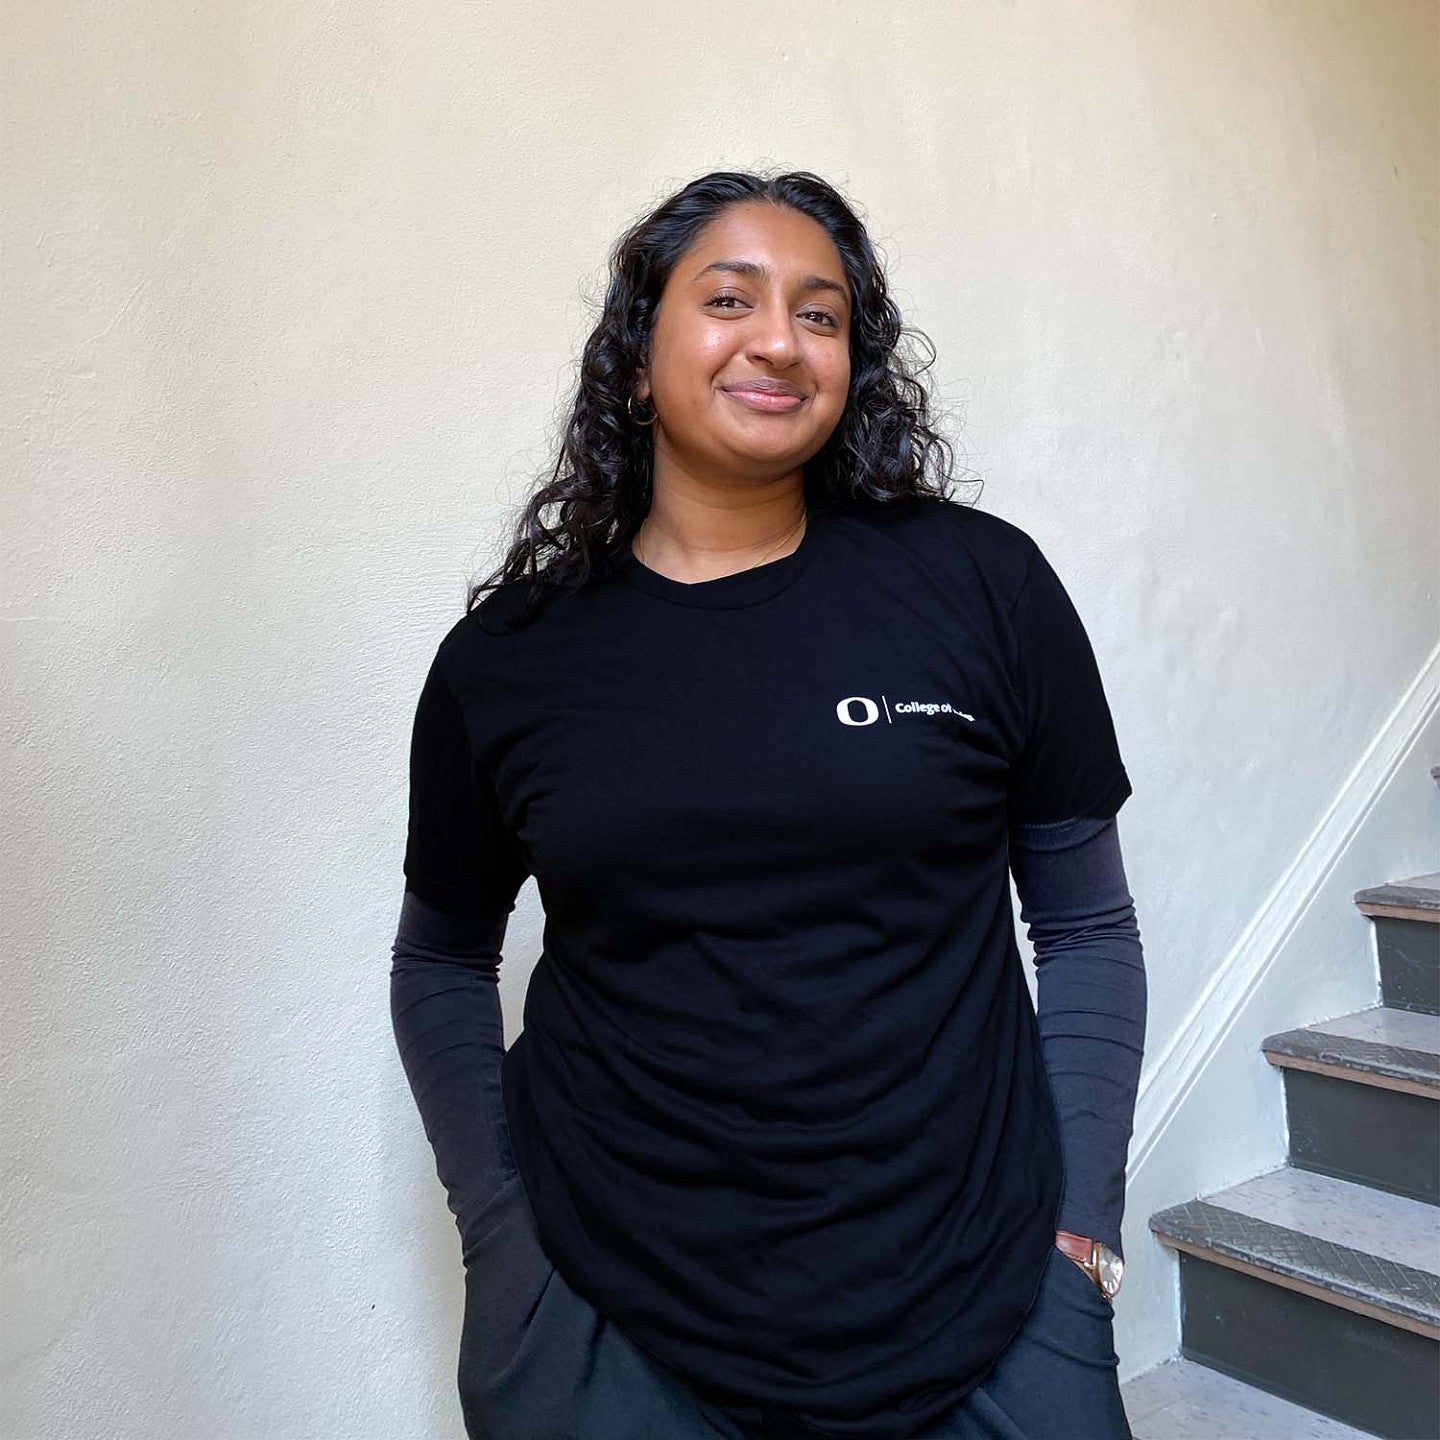 Women's Black T-Shirt: Front reads "O logo | College of Design." Back includes Duck logo with text "Oregon Design Ducks" and "#ODD"